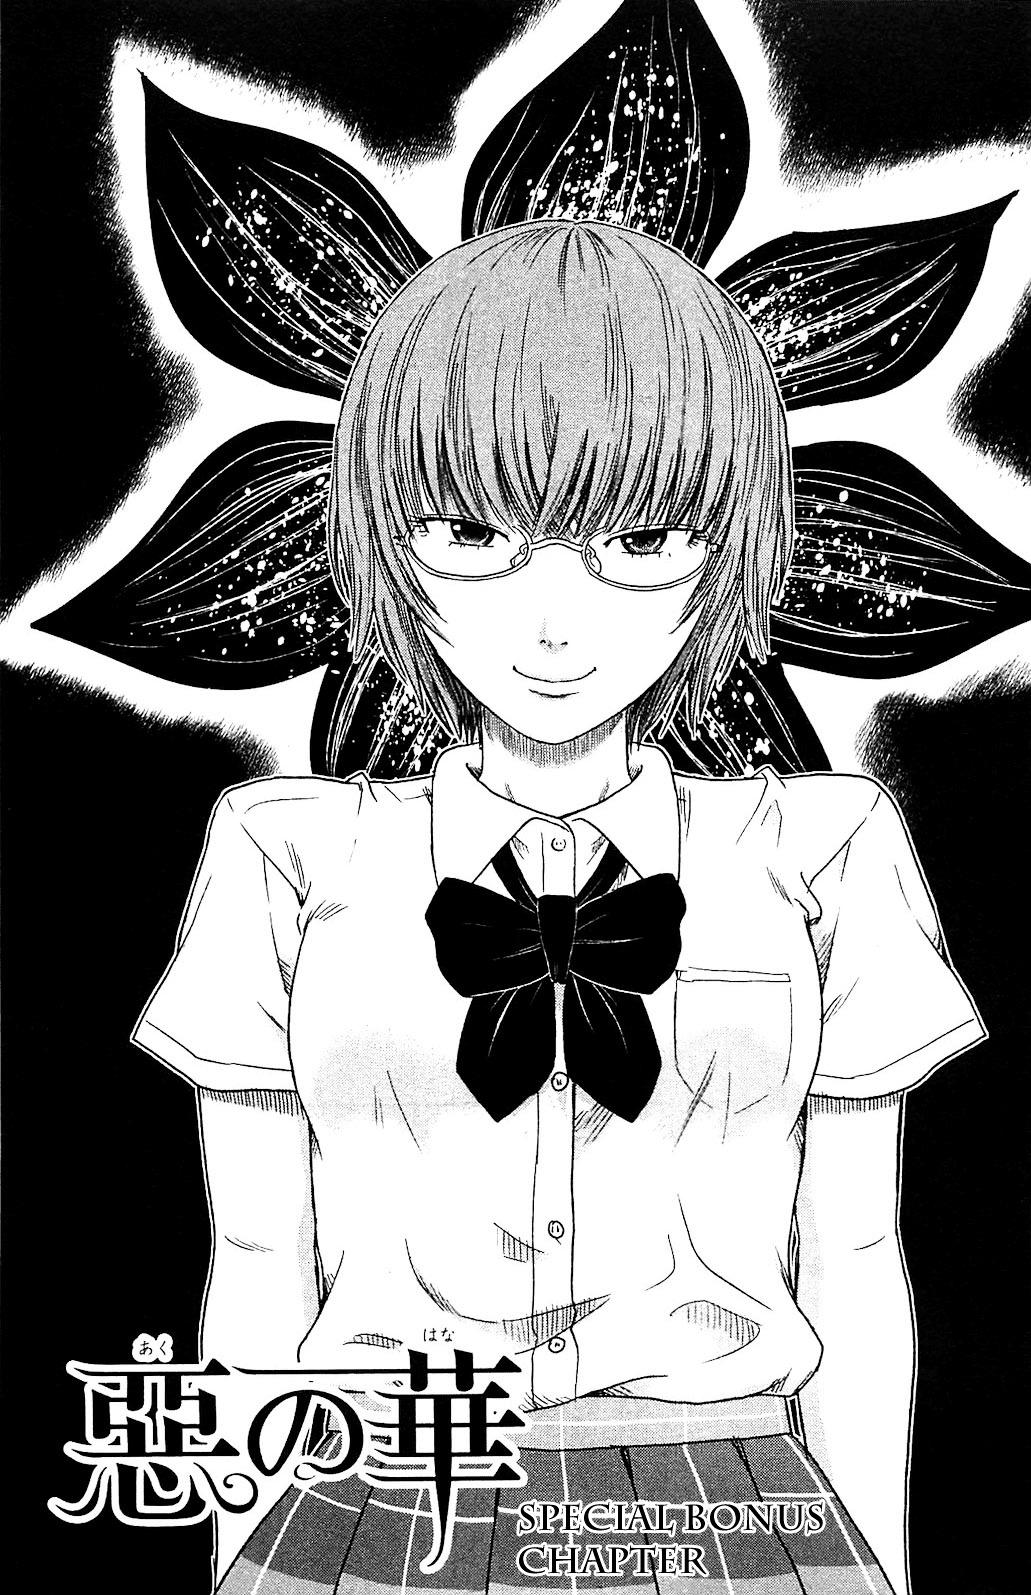 The Flowers of Evil, Chapter 36 - The Flowers of Evil Manga Online